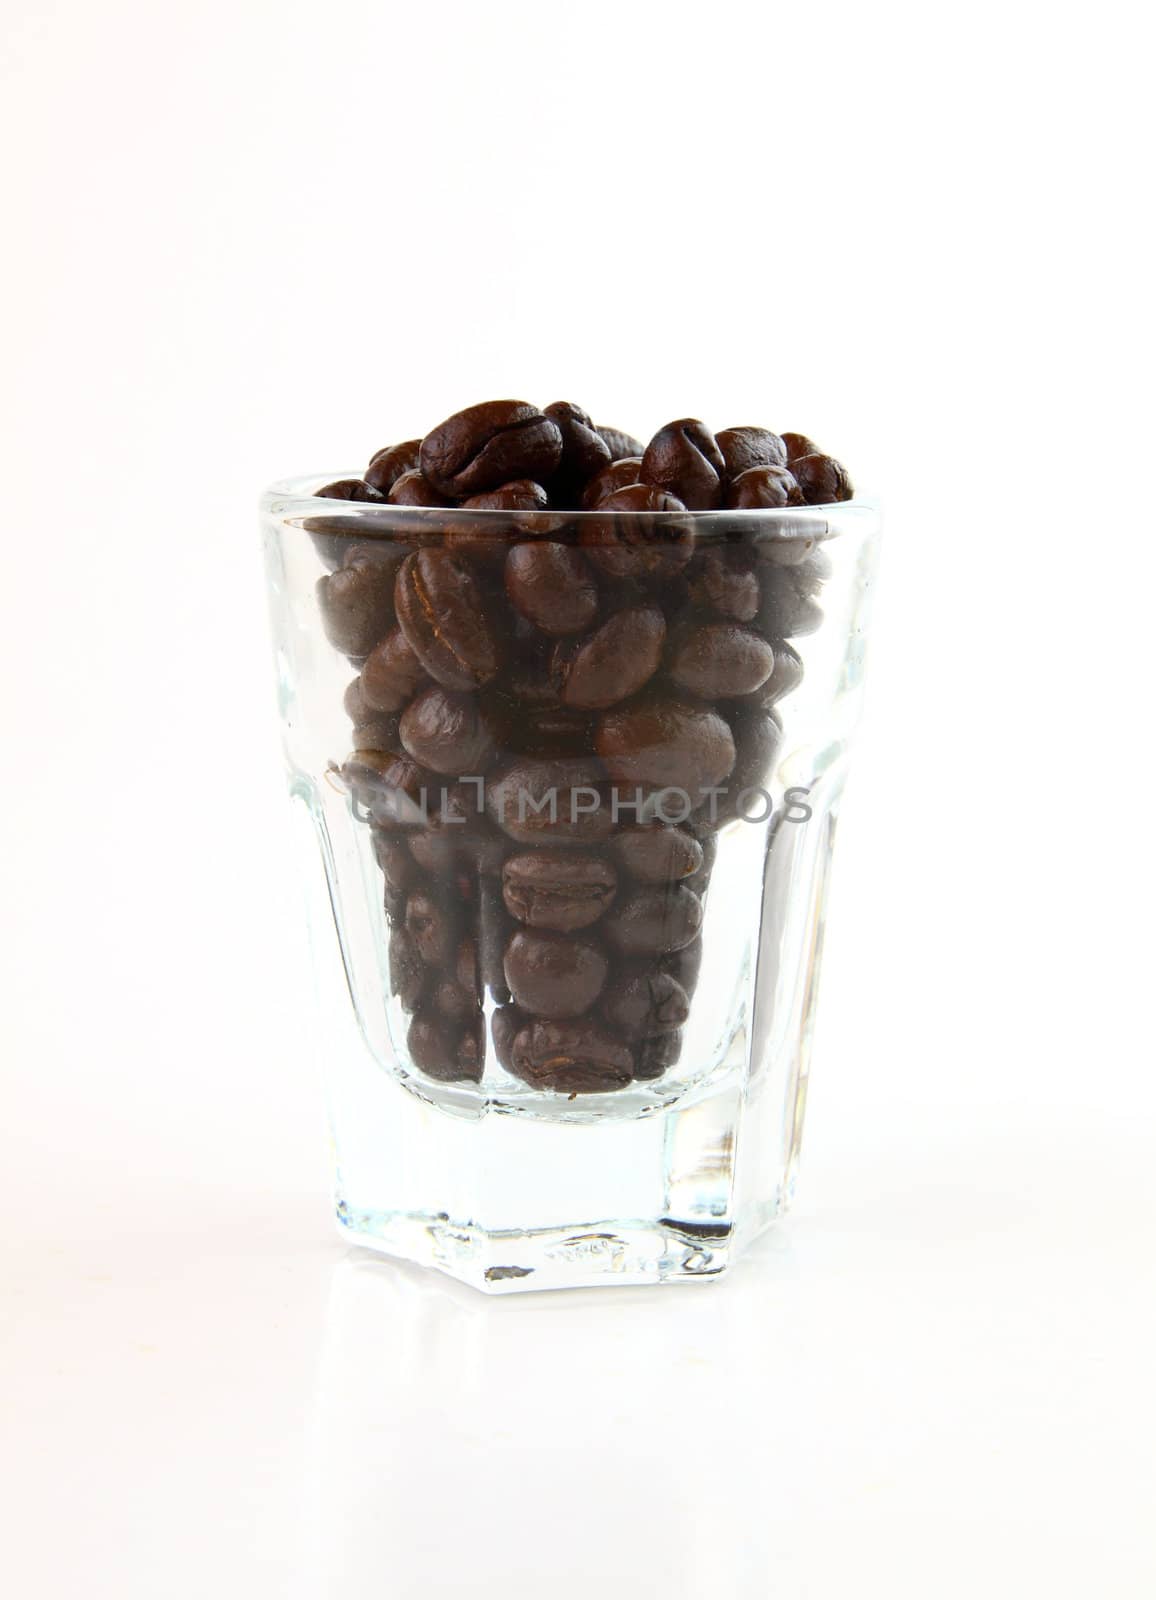 Coffee beans in a small glass on white background  by nuchylee